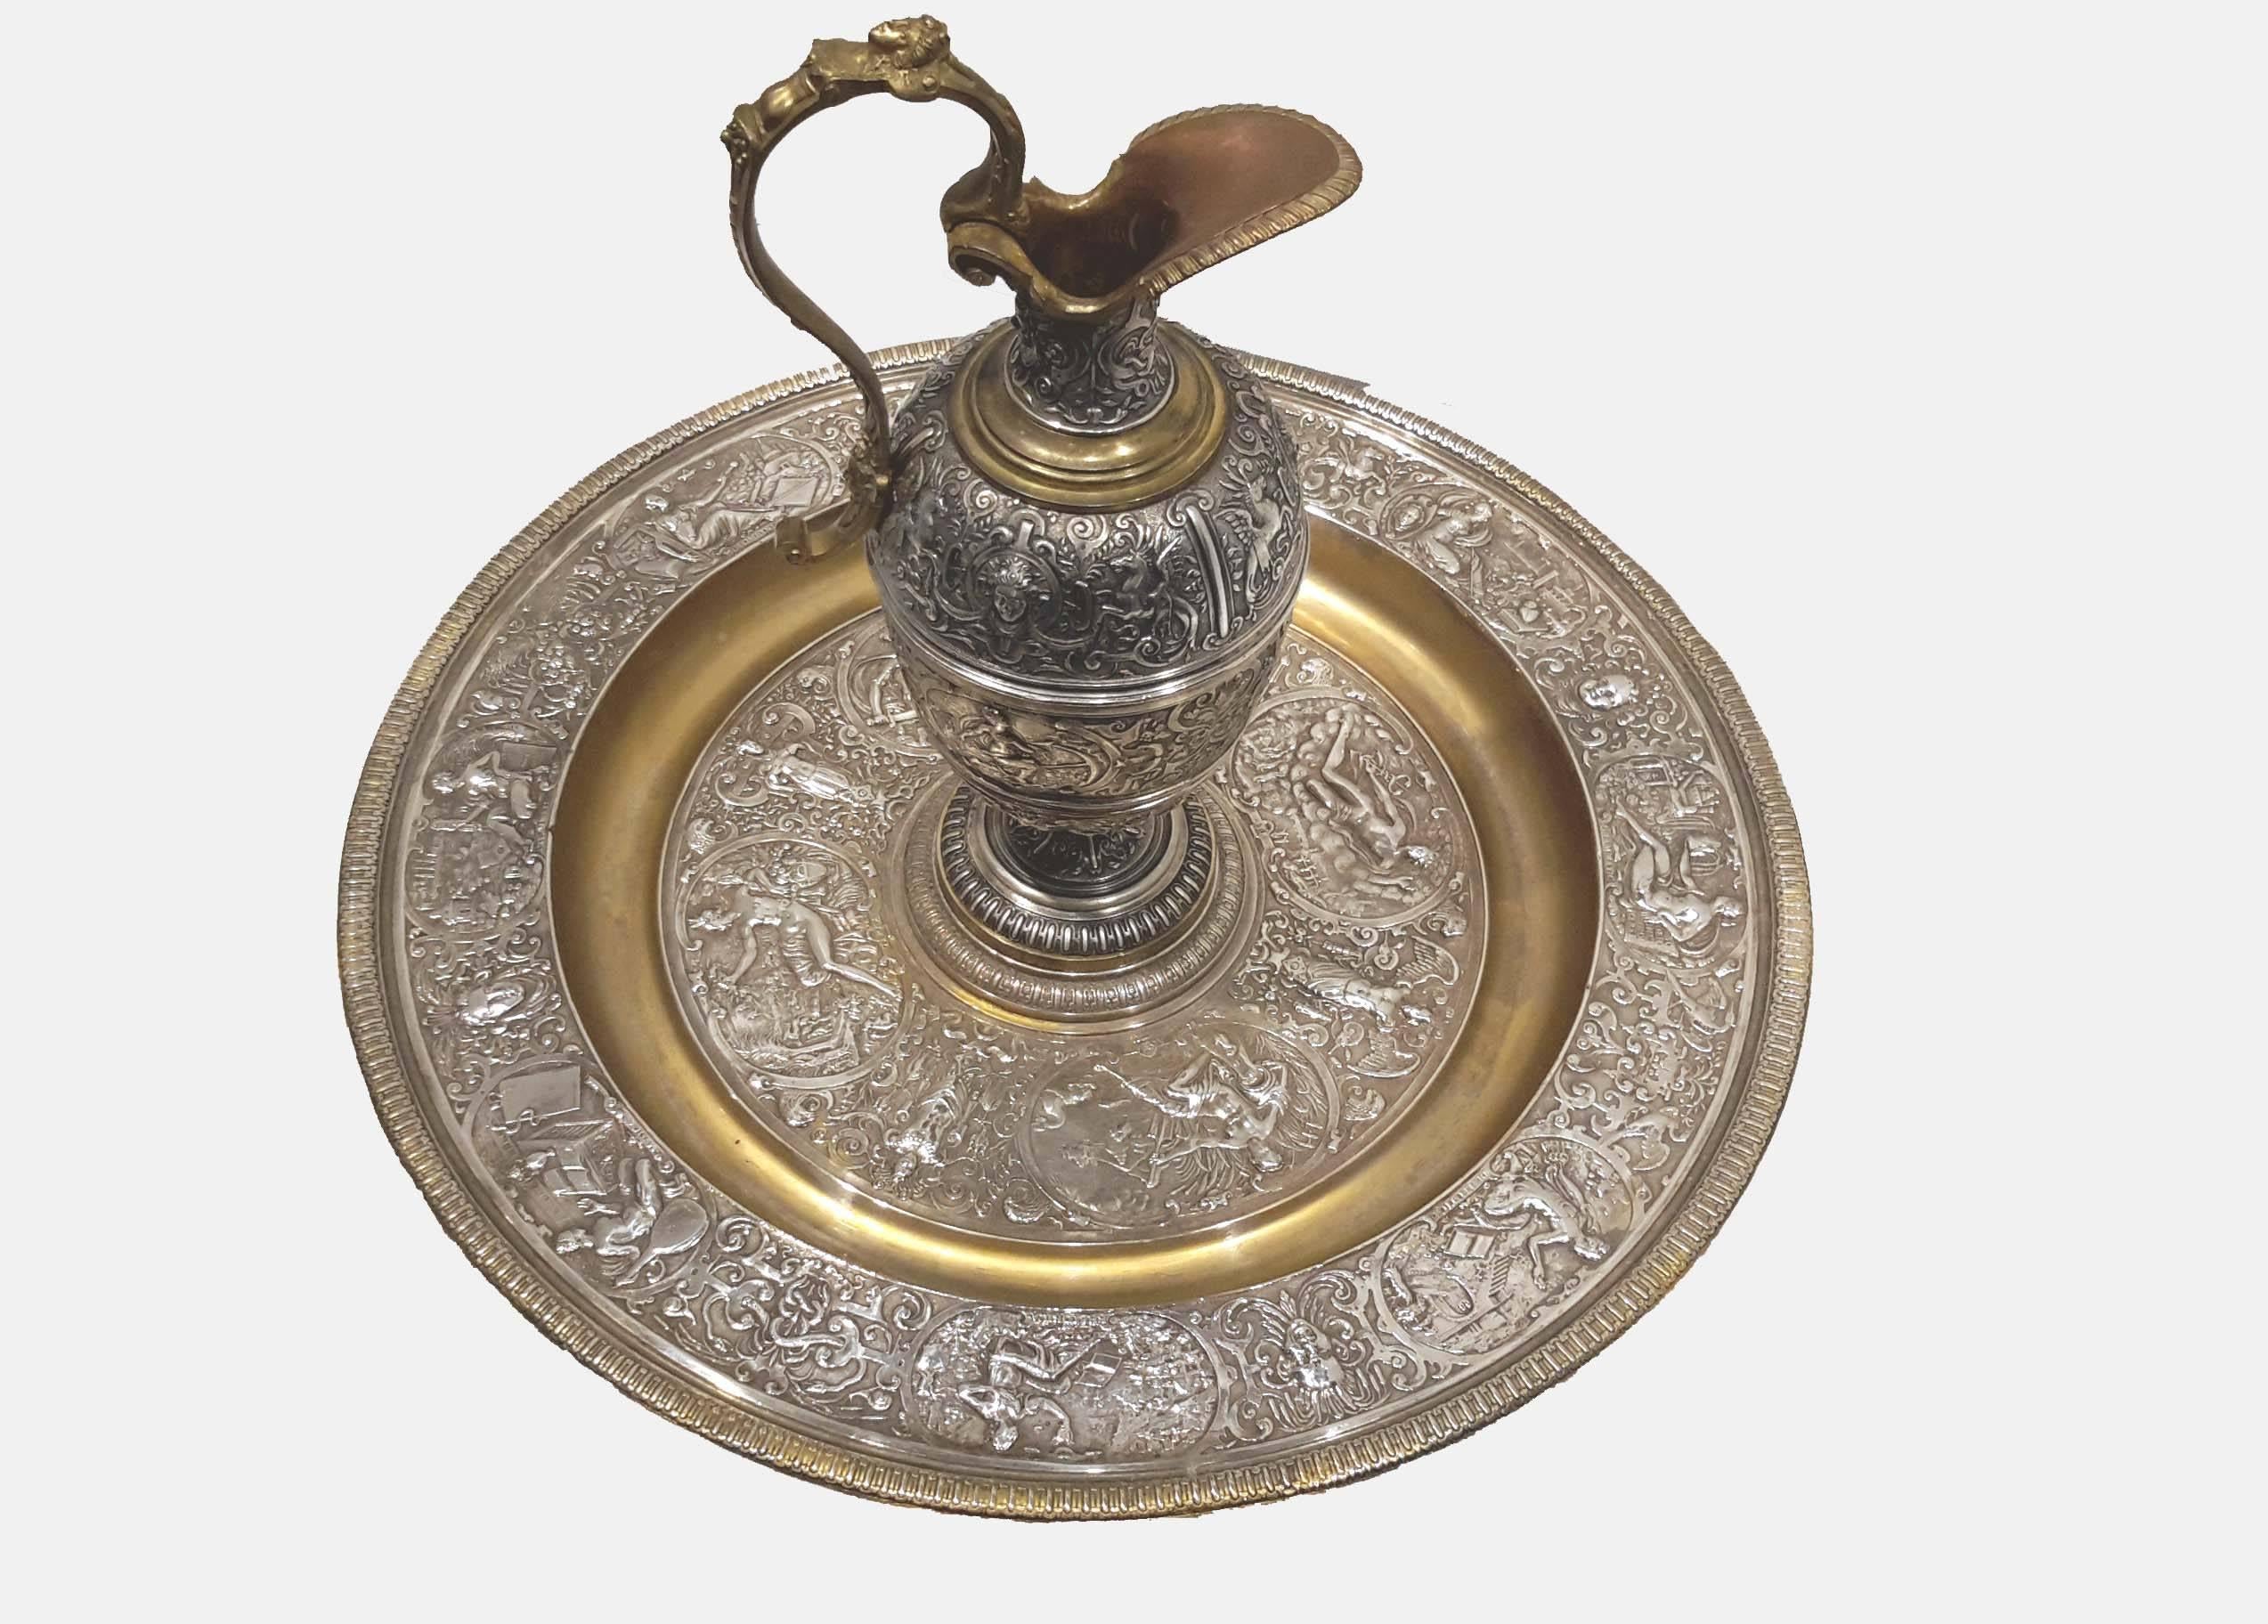 Attributed to Elkington Co. Renaissance Revival electroplate charger and ewer, 19th century. Tray 17 1/2